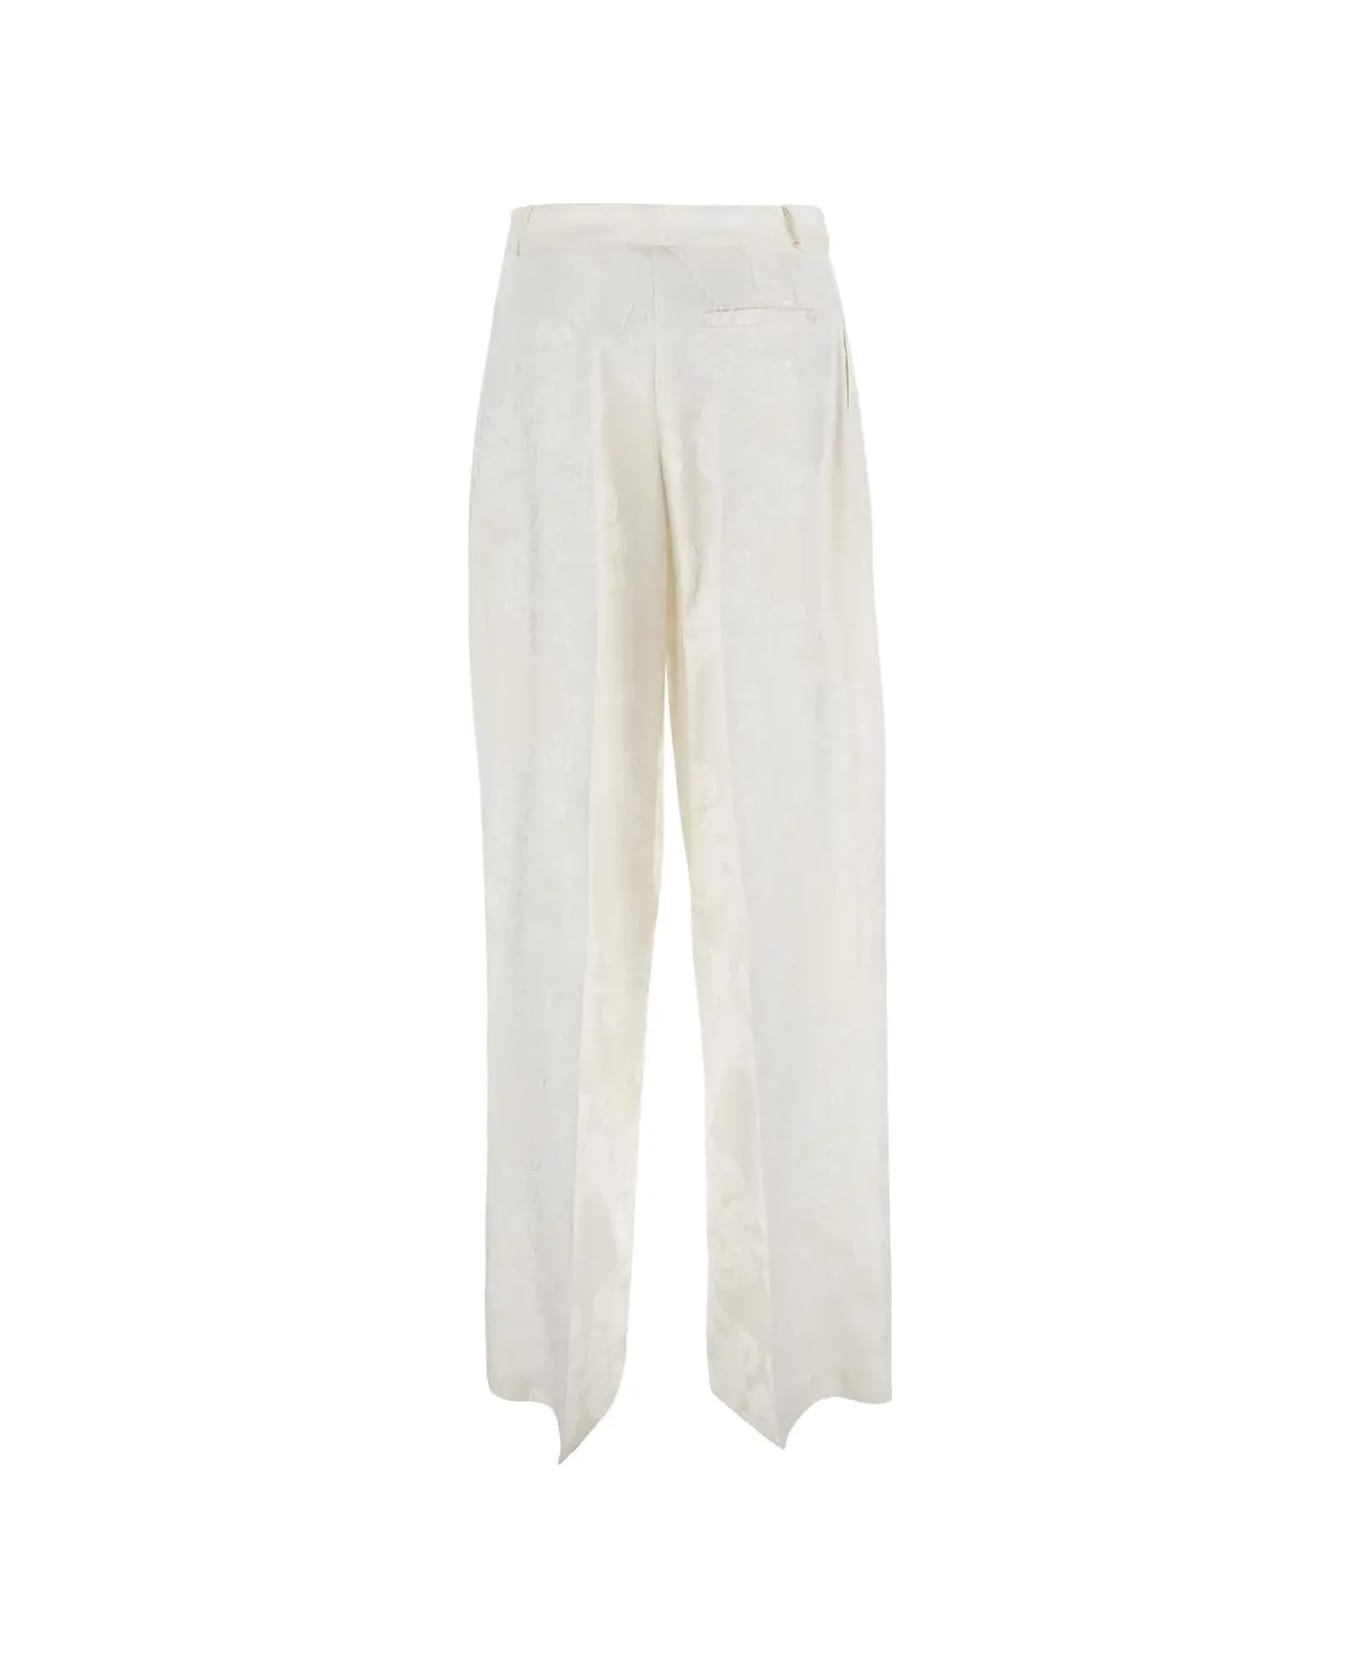 SEMICOUTURE Viscose Trouser - Ivory ボトムス